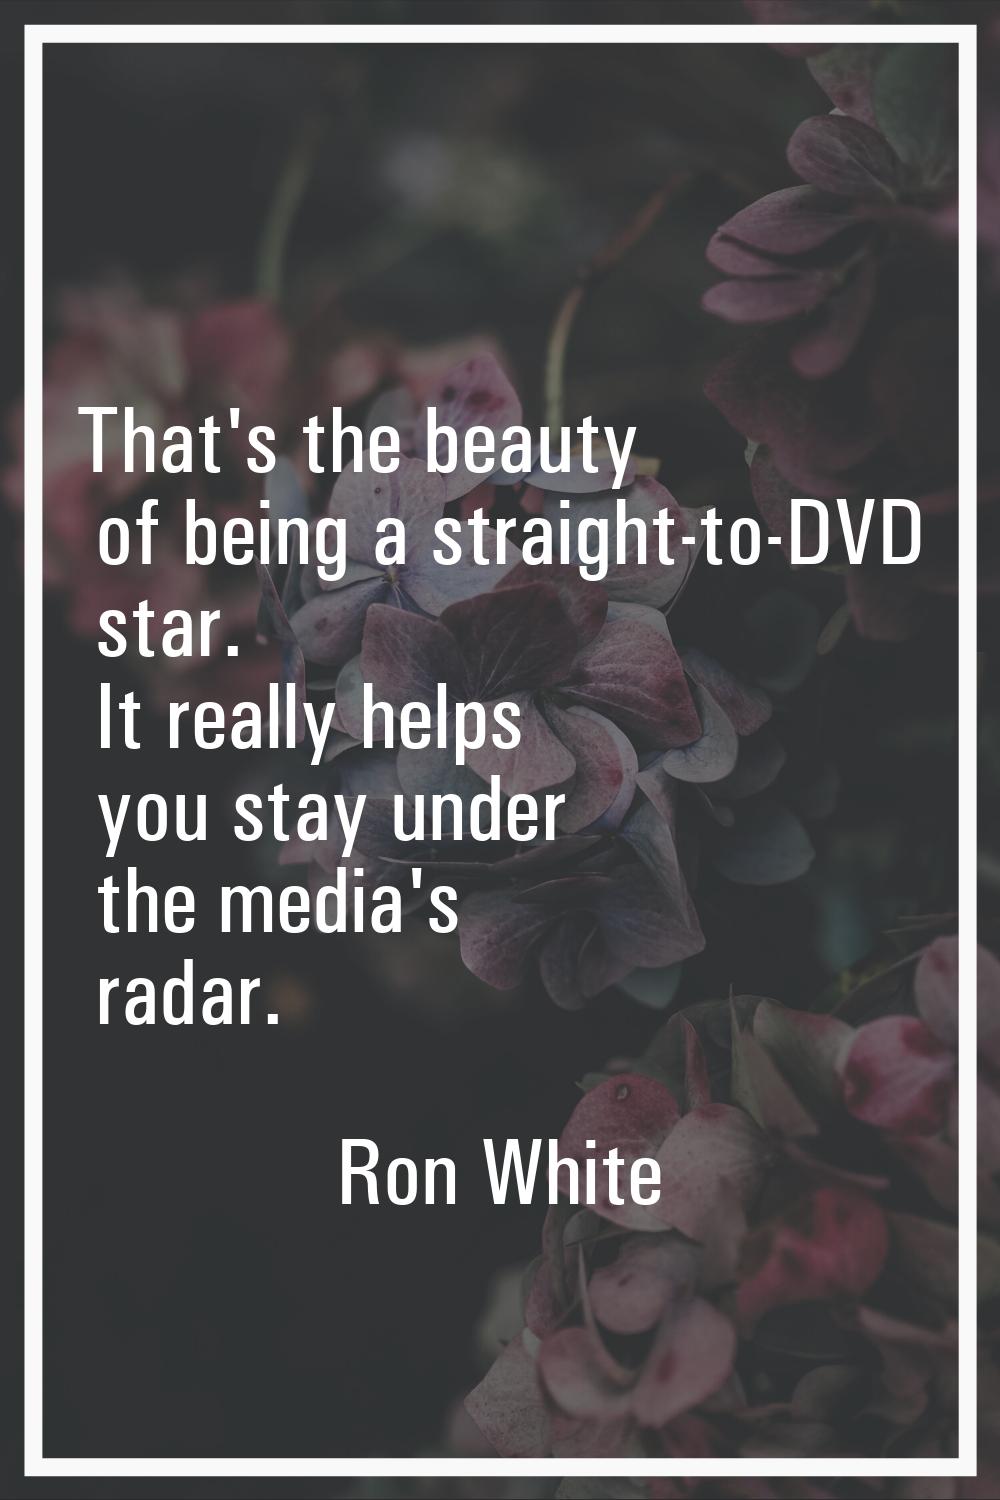 That's the beauty of being a straight-to-DVD star. It really helps you stay under the media's radar